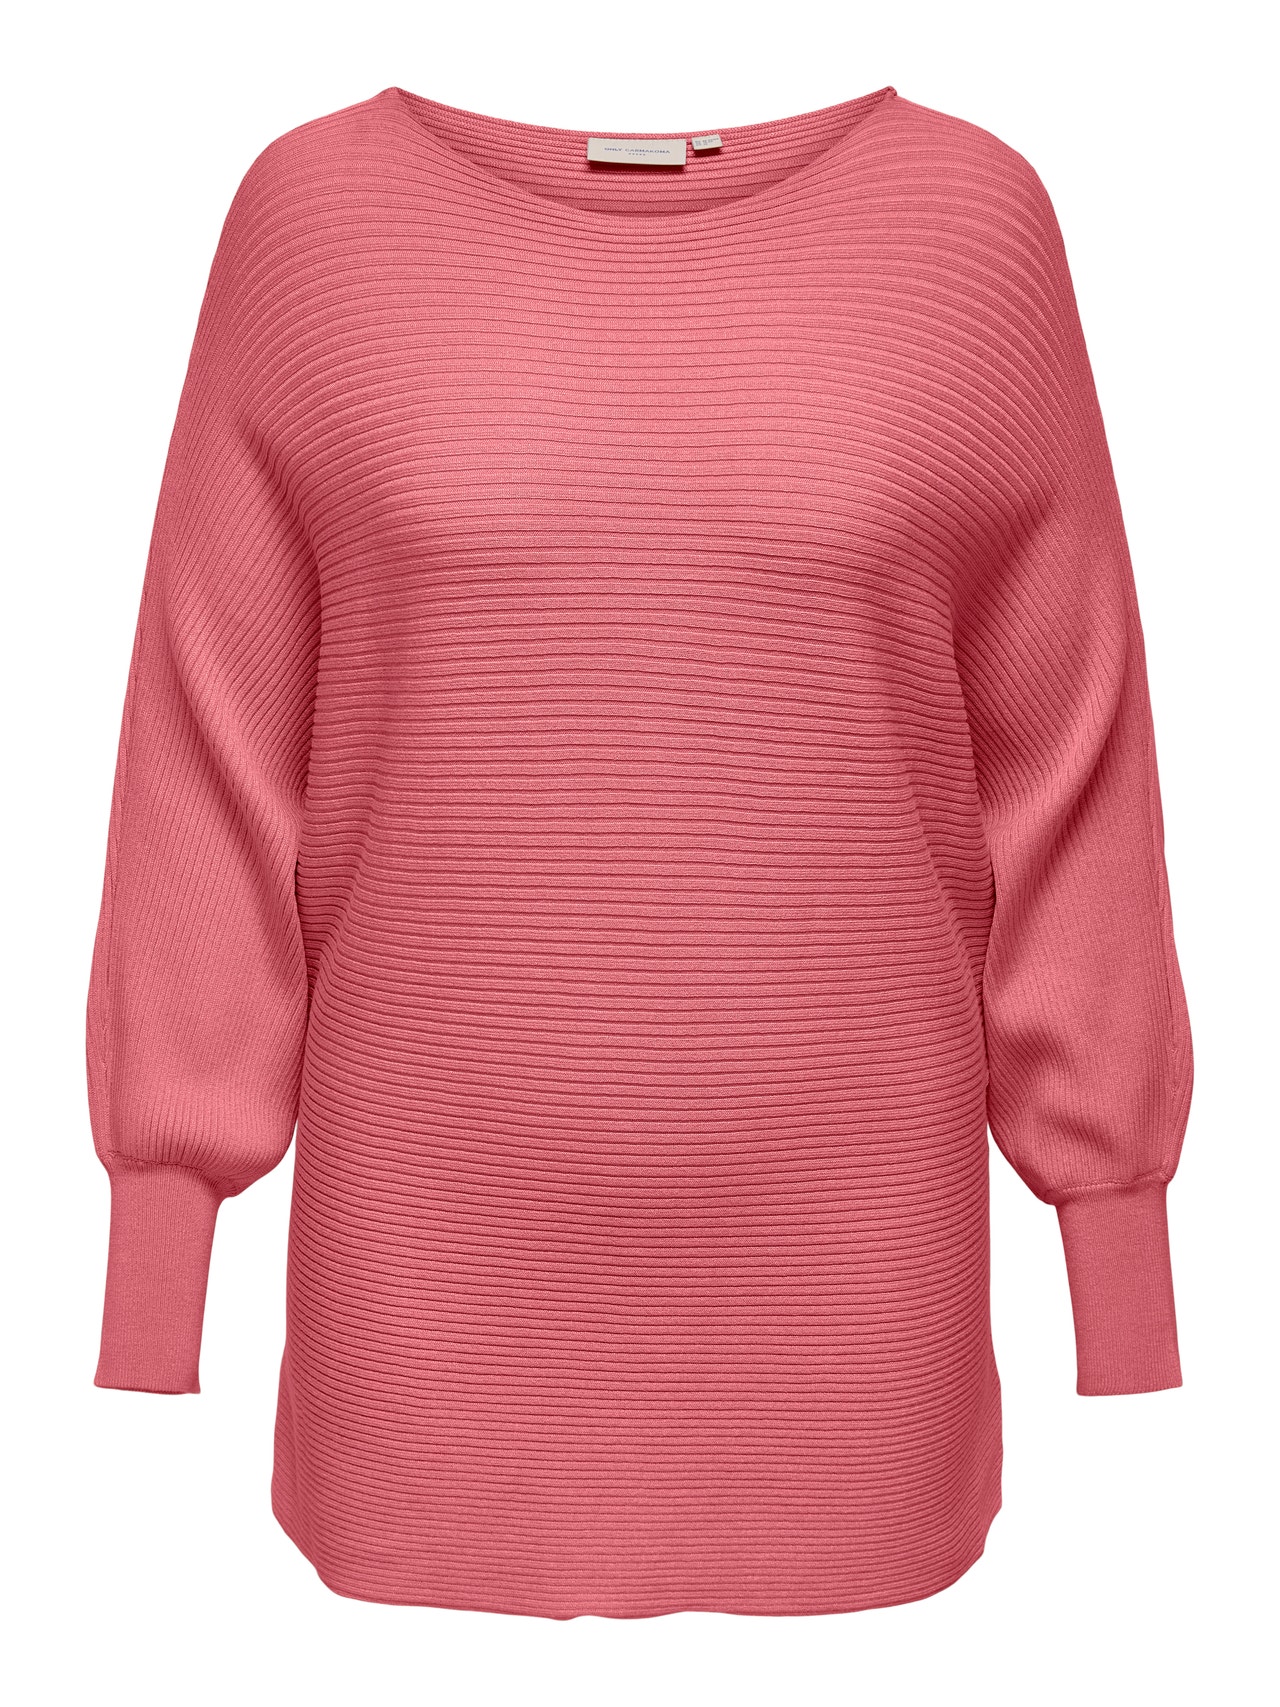 ONLY Curvy rib structured Knitted Pullover -Tea Rose - 15257227